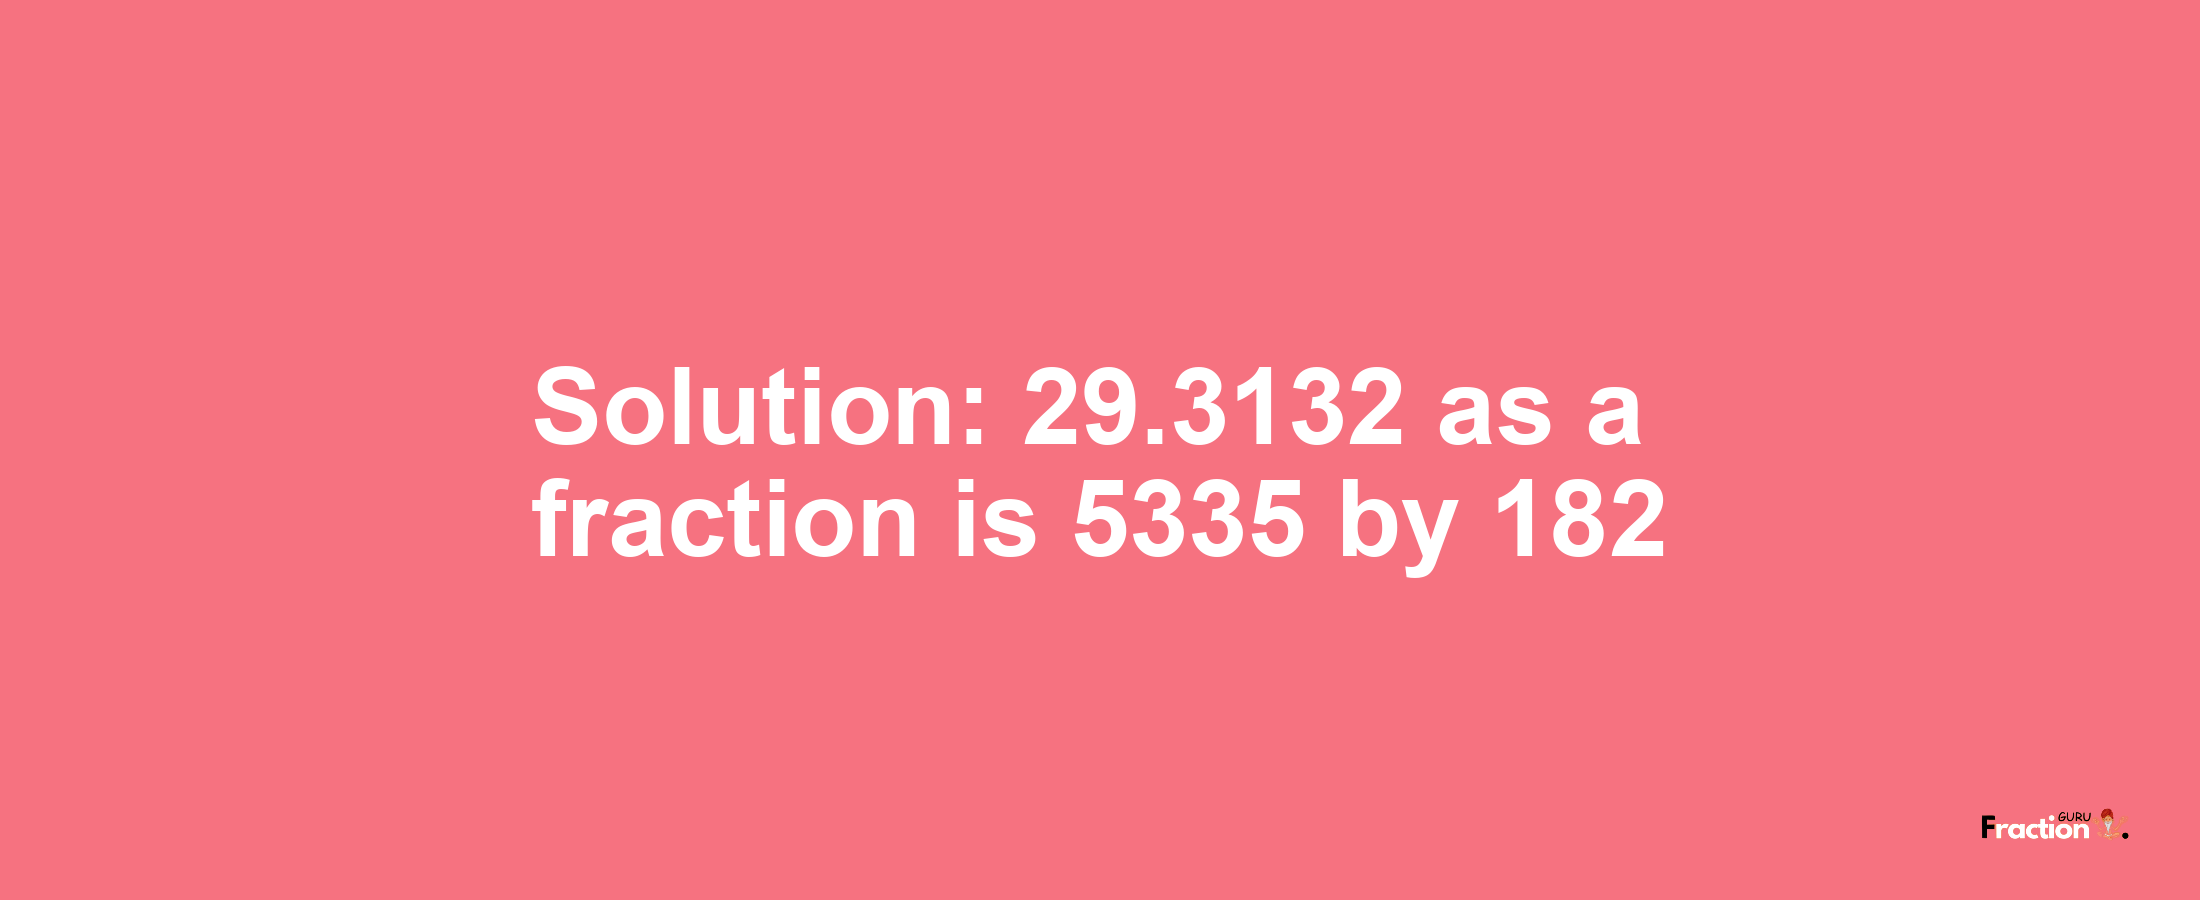 Solution:29.3132 as a fraction is 5335/182